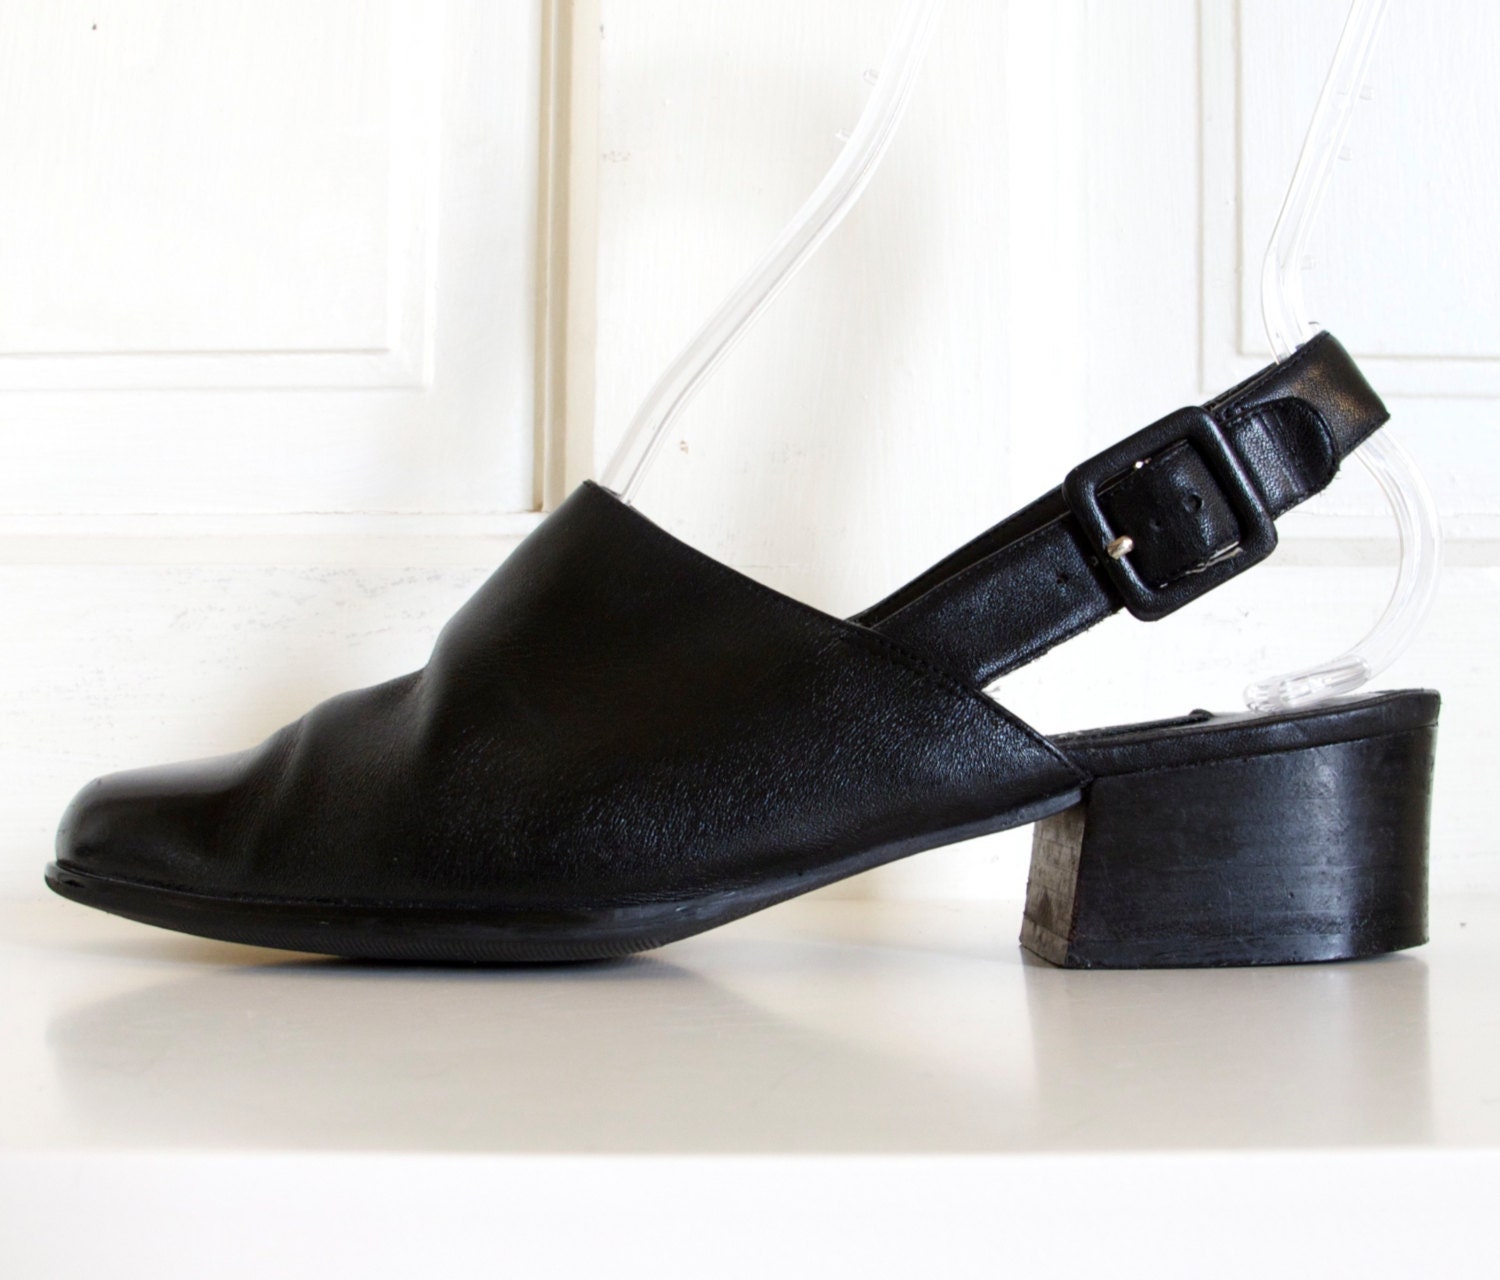 90s Black Leather Slingback Shoes / Closed Toe Sandals